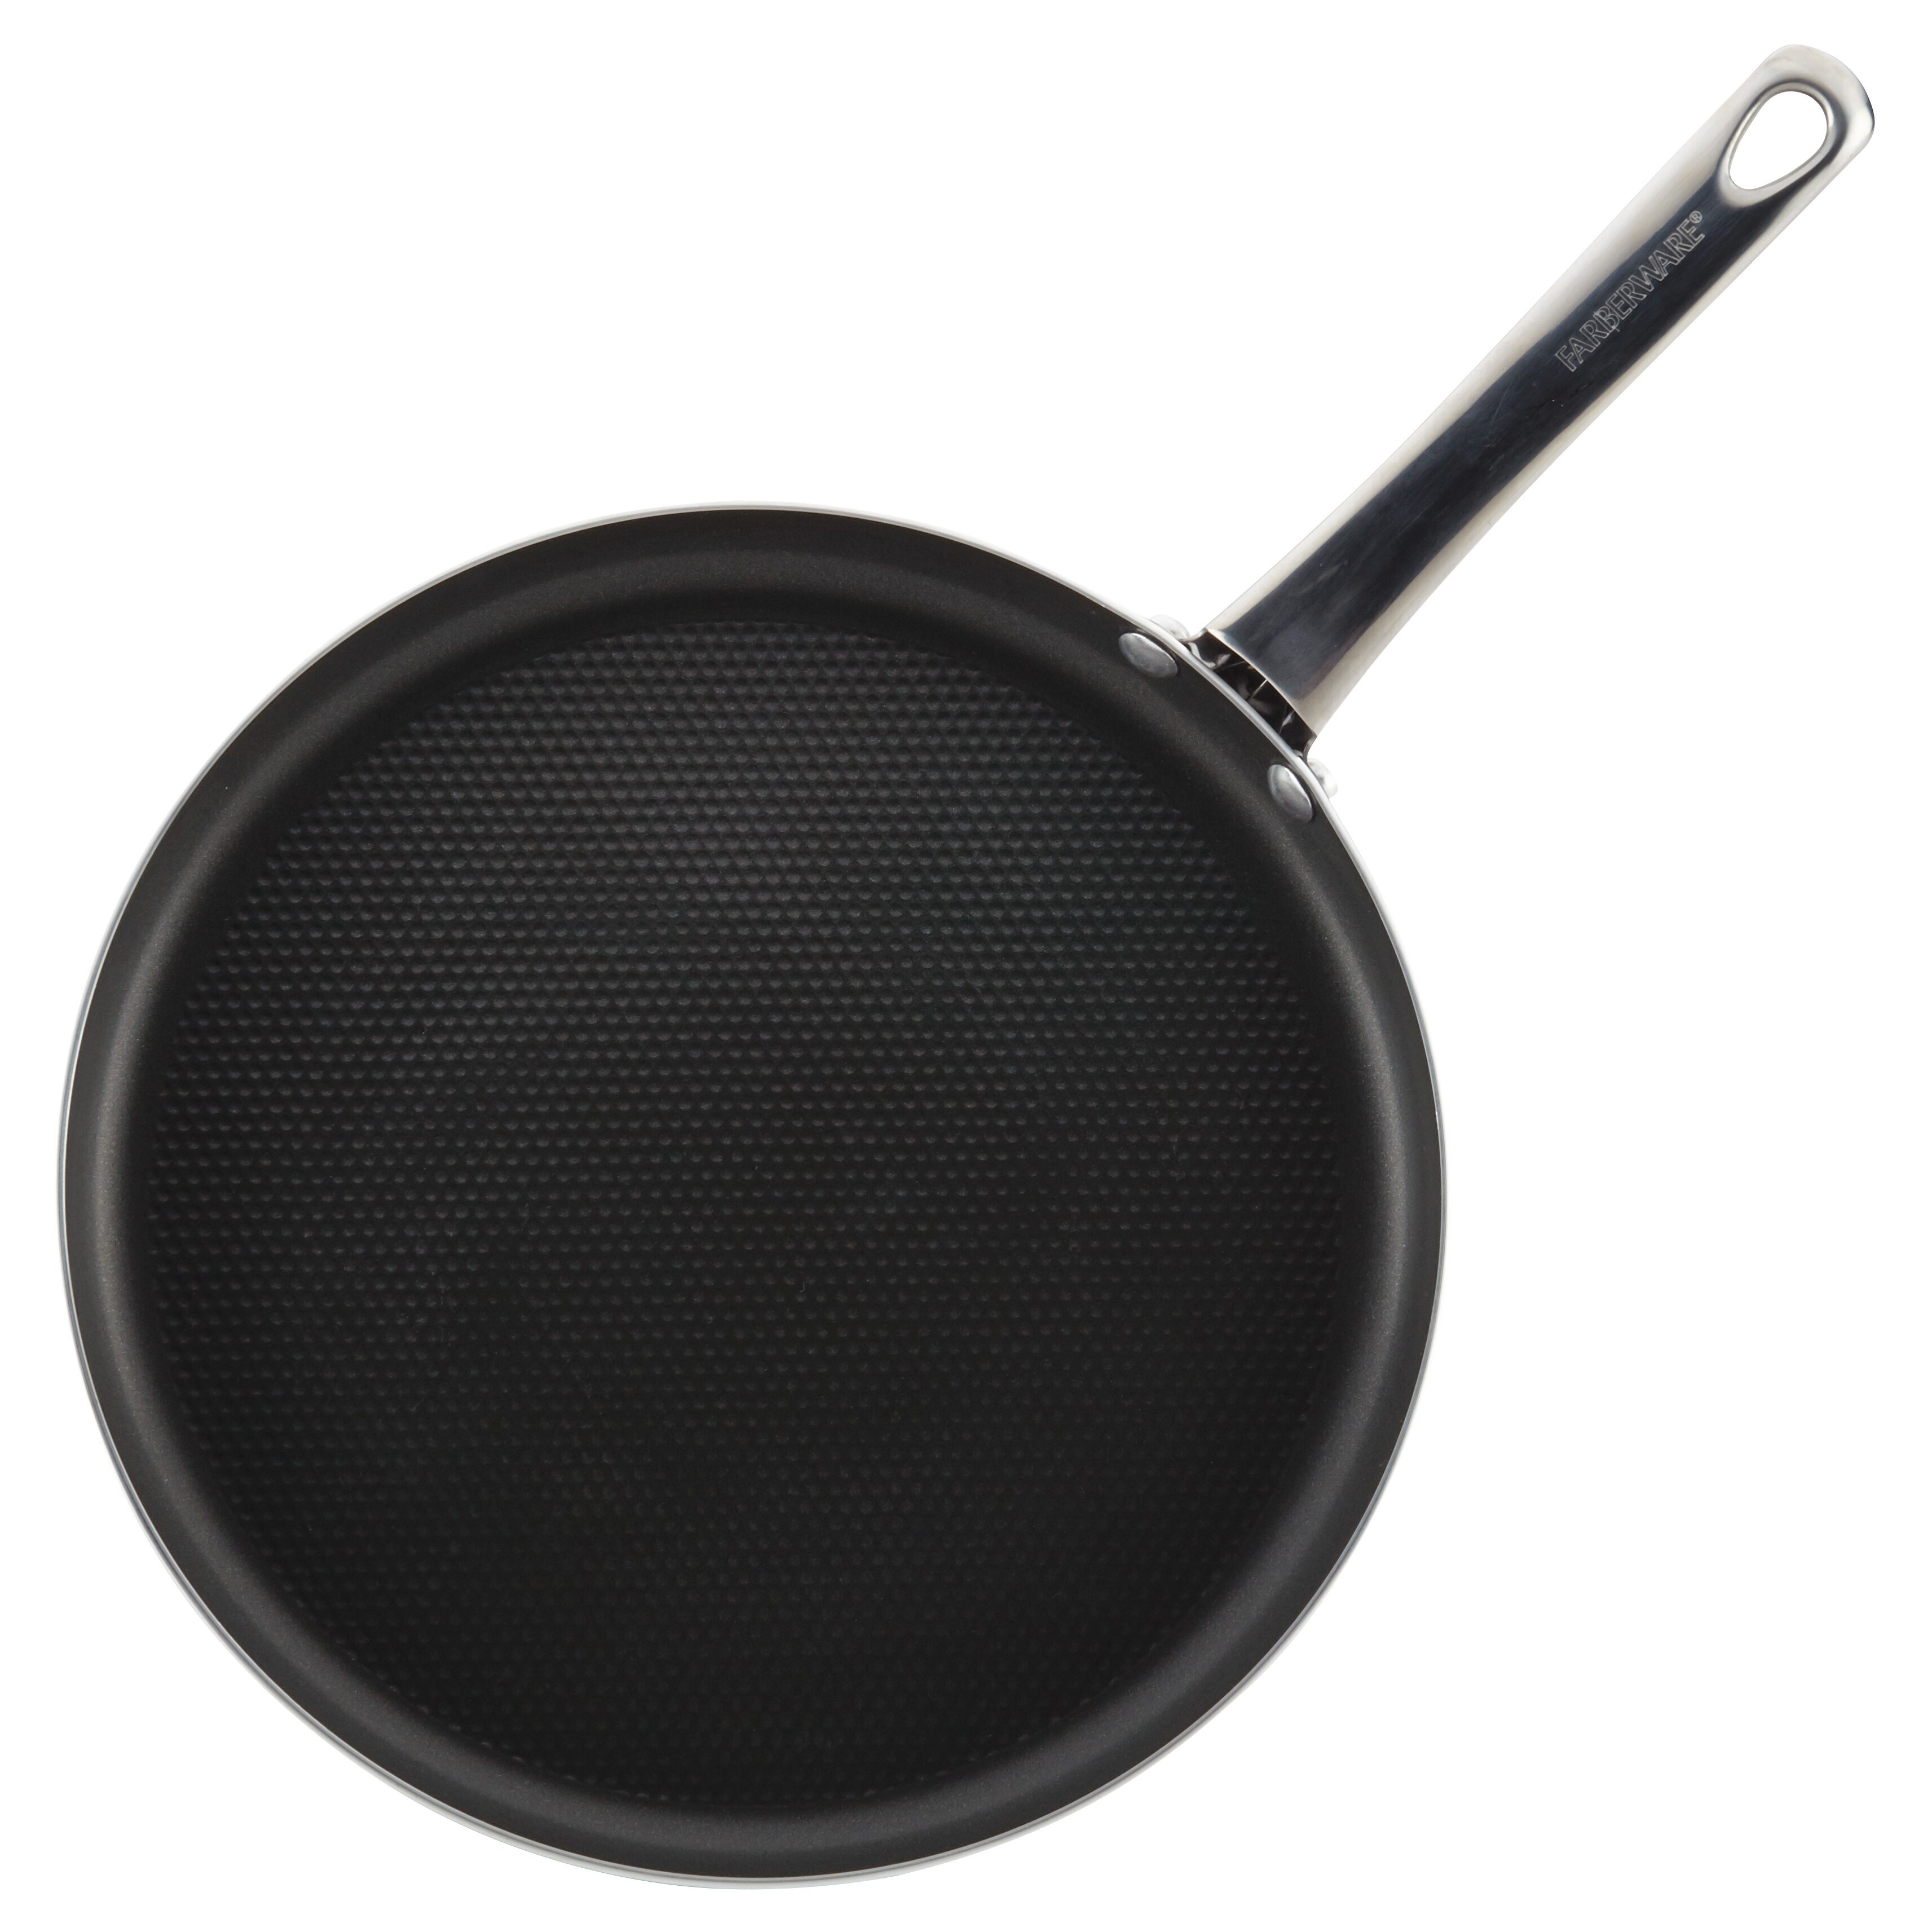 https://ak1.ostkcdn.com/images/products/24038312/Farberware-Luminescence-Nonstick-12-Round-Griddle-Sapphire-Shimmer-9ad05282-637c-414c-809c-d4447308dc4b.jpg